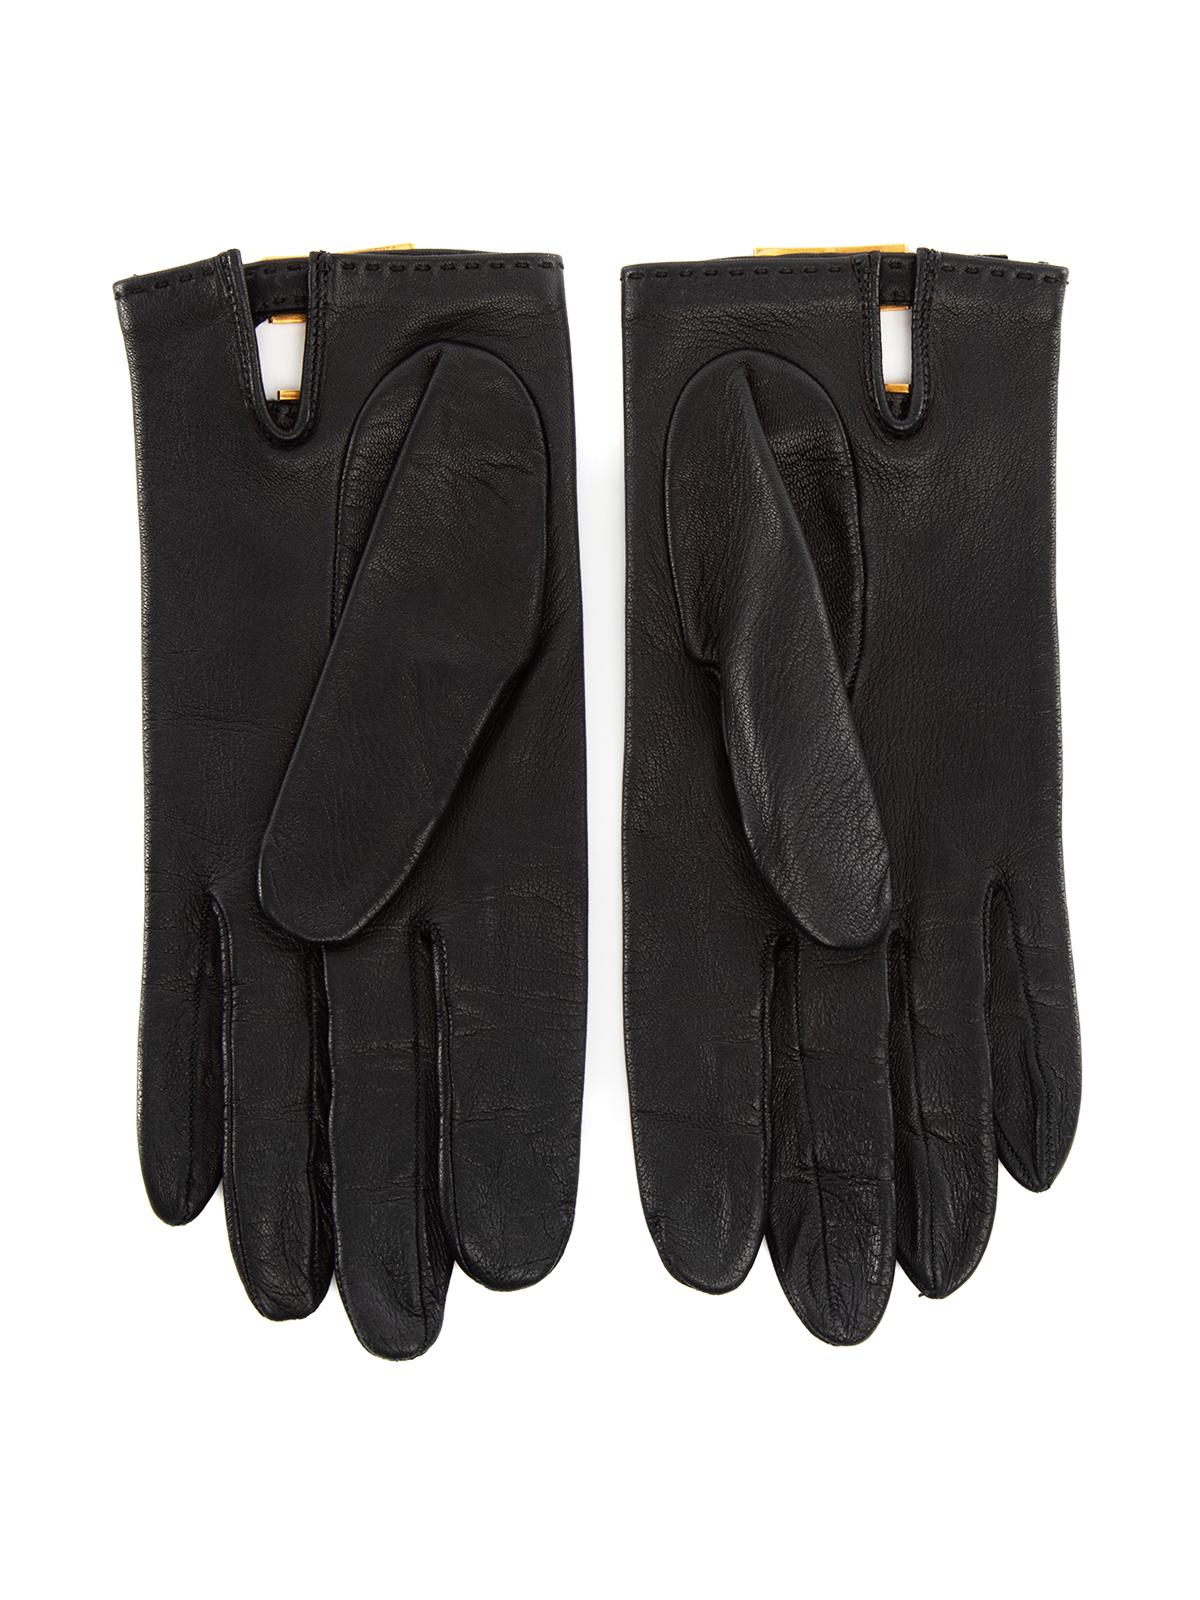 Condition is Very good. Minimal wear to gloves is evident on this used Hermes designer resale item. Details Colour - black Material - leather Embellishments- gold tone hardware Made in France Composition EXTERIOR:(Leather) INTERIOR: (suede) Size &